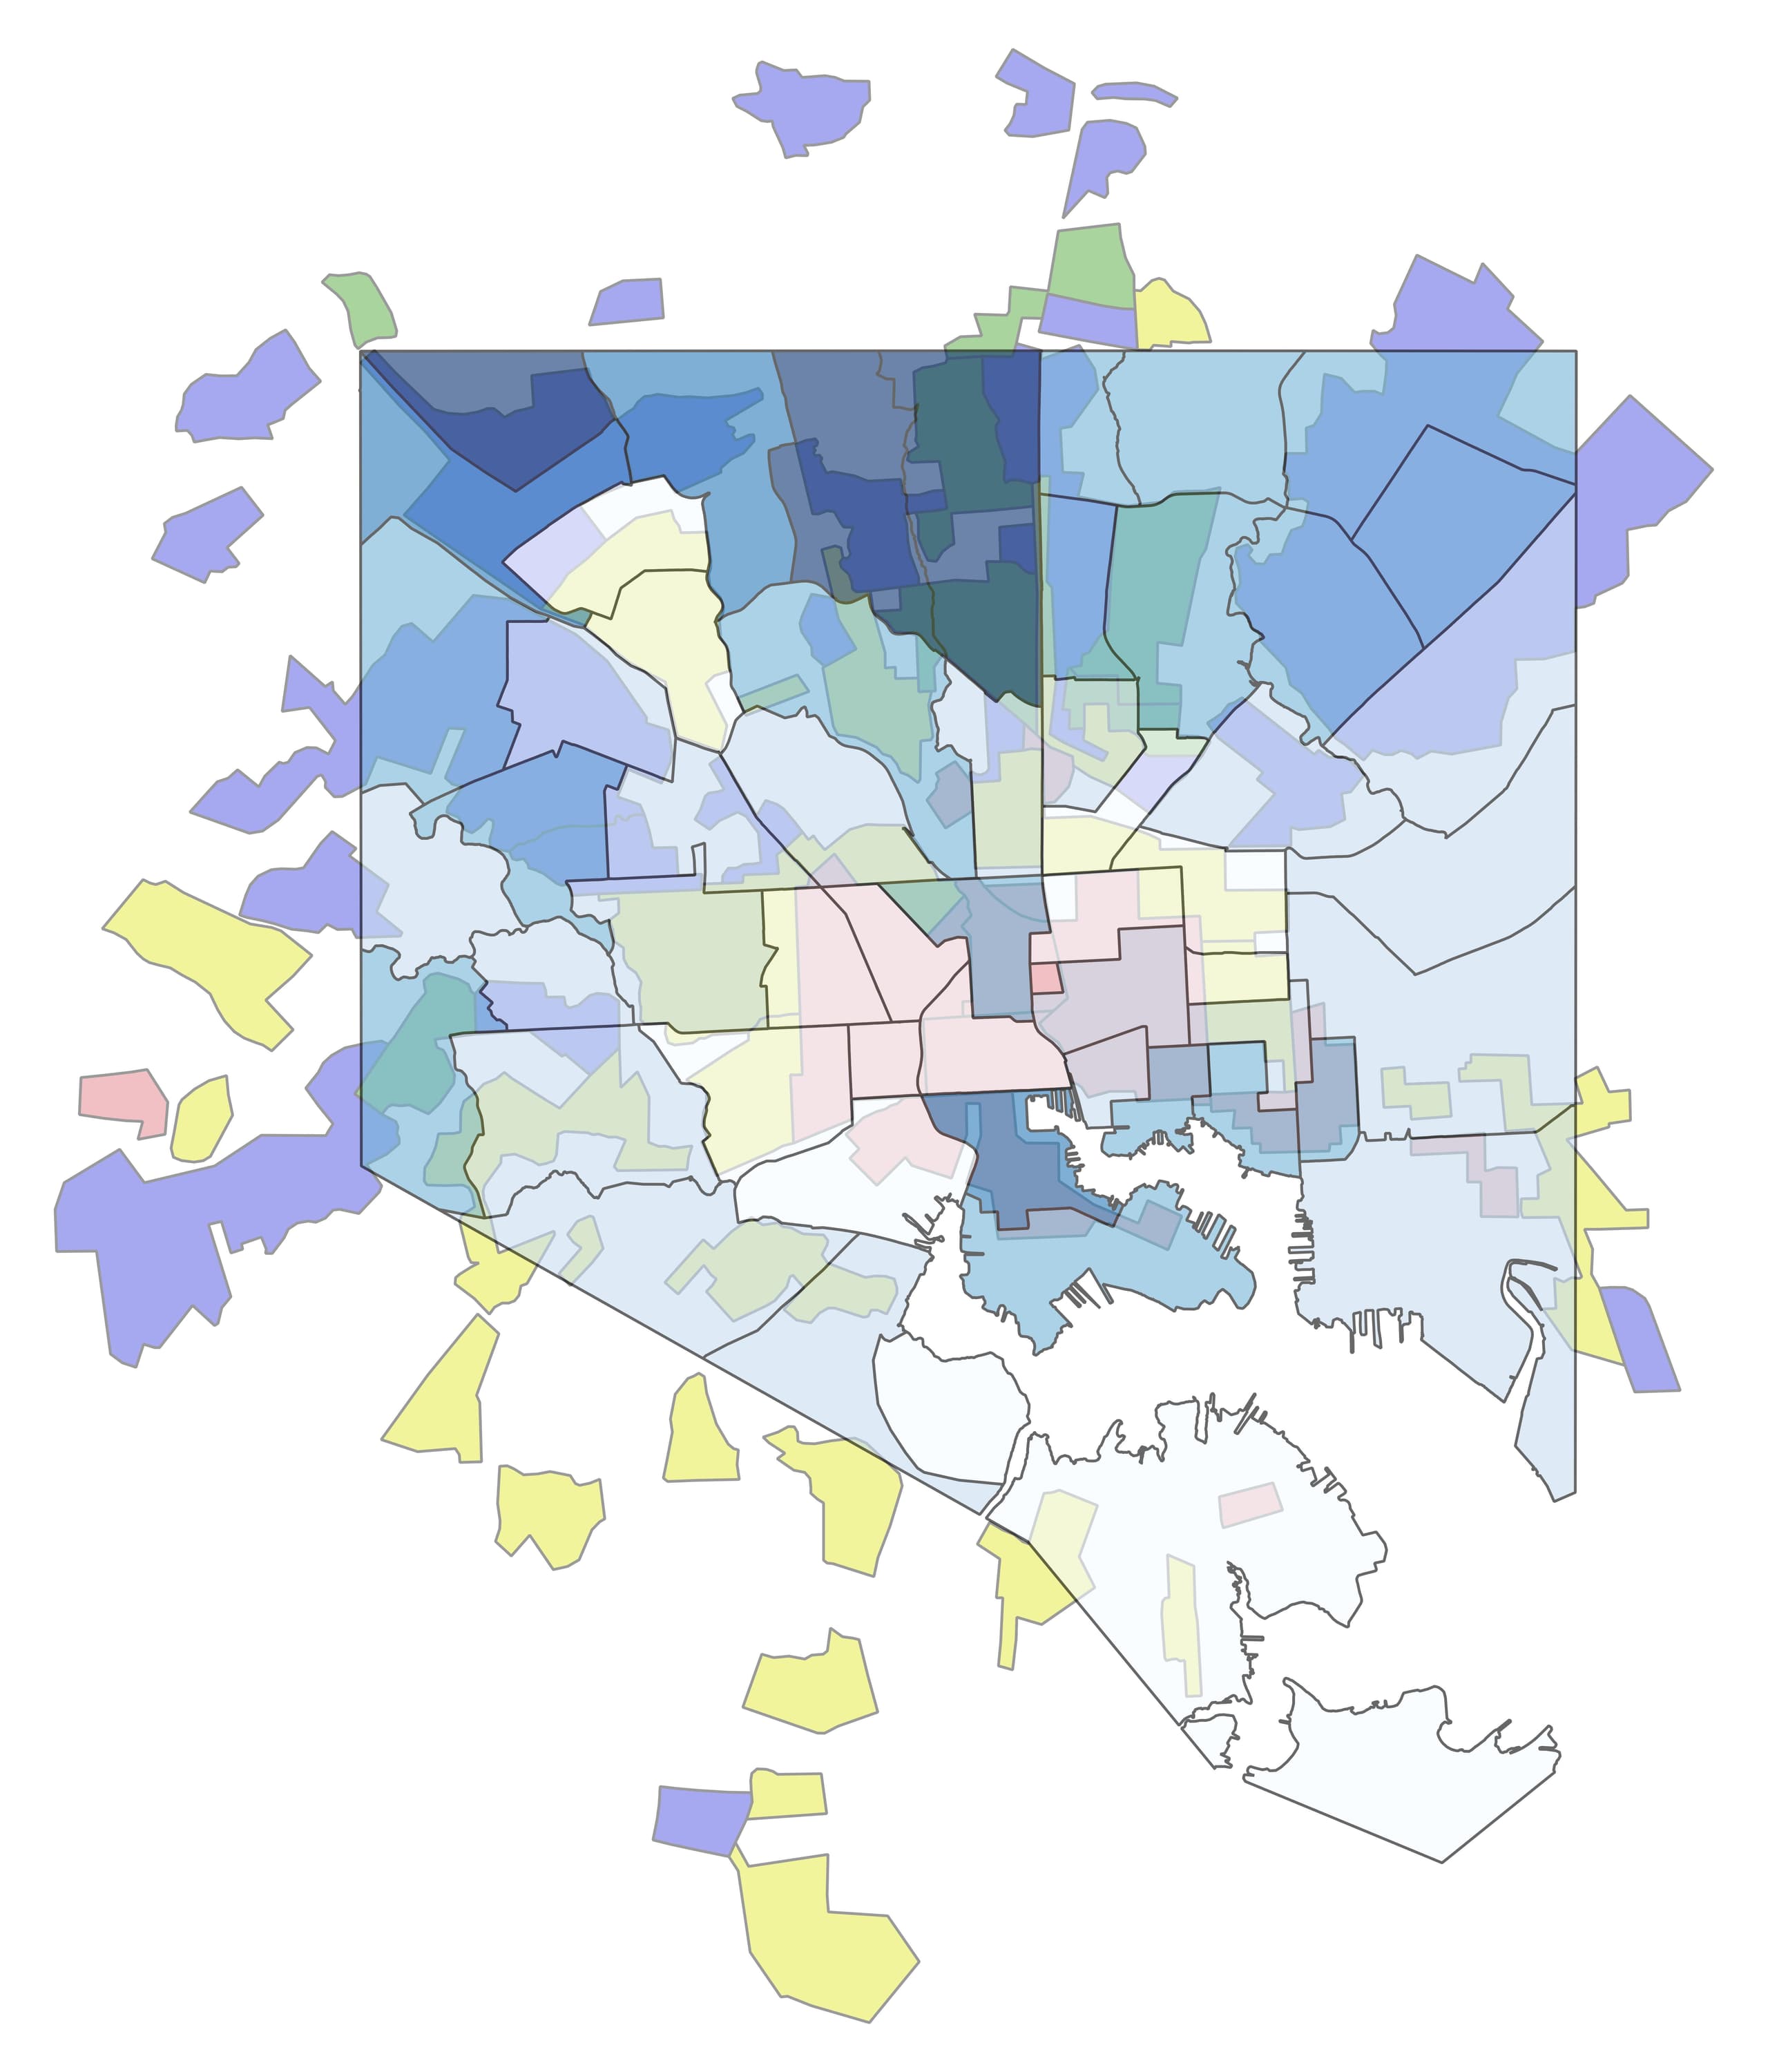 image ofBaltimore CSAs’ life expectancy overlaid on top of HOLC redlining map